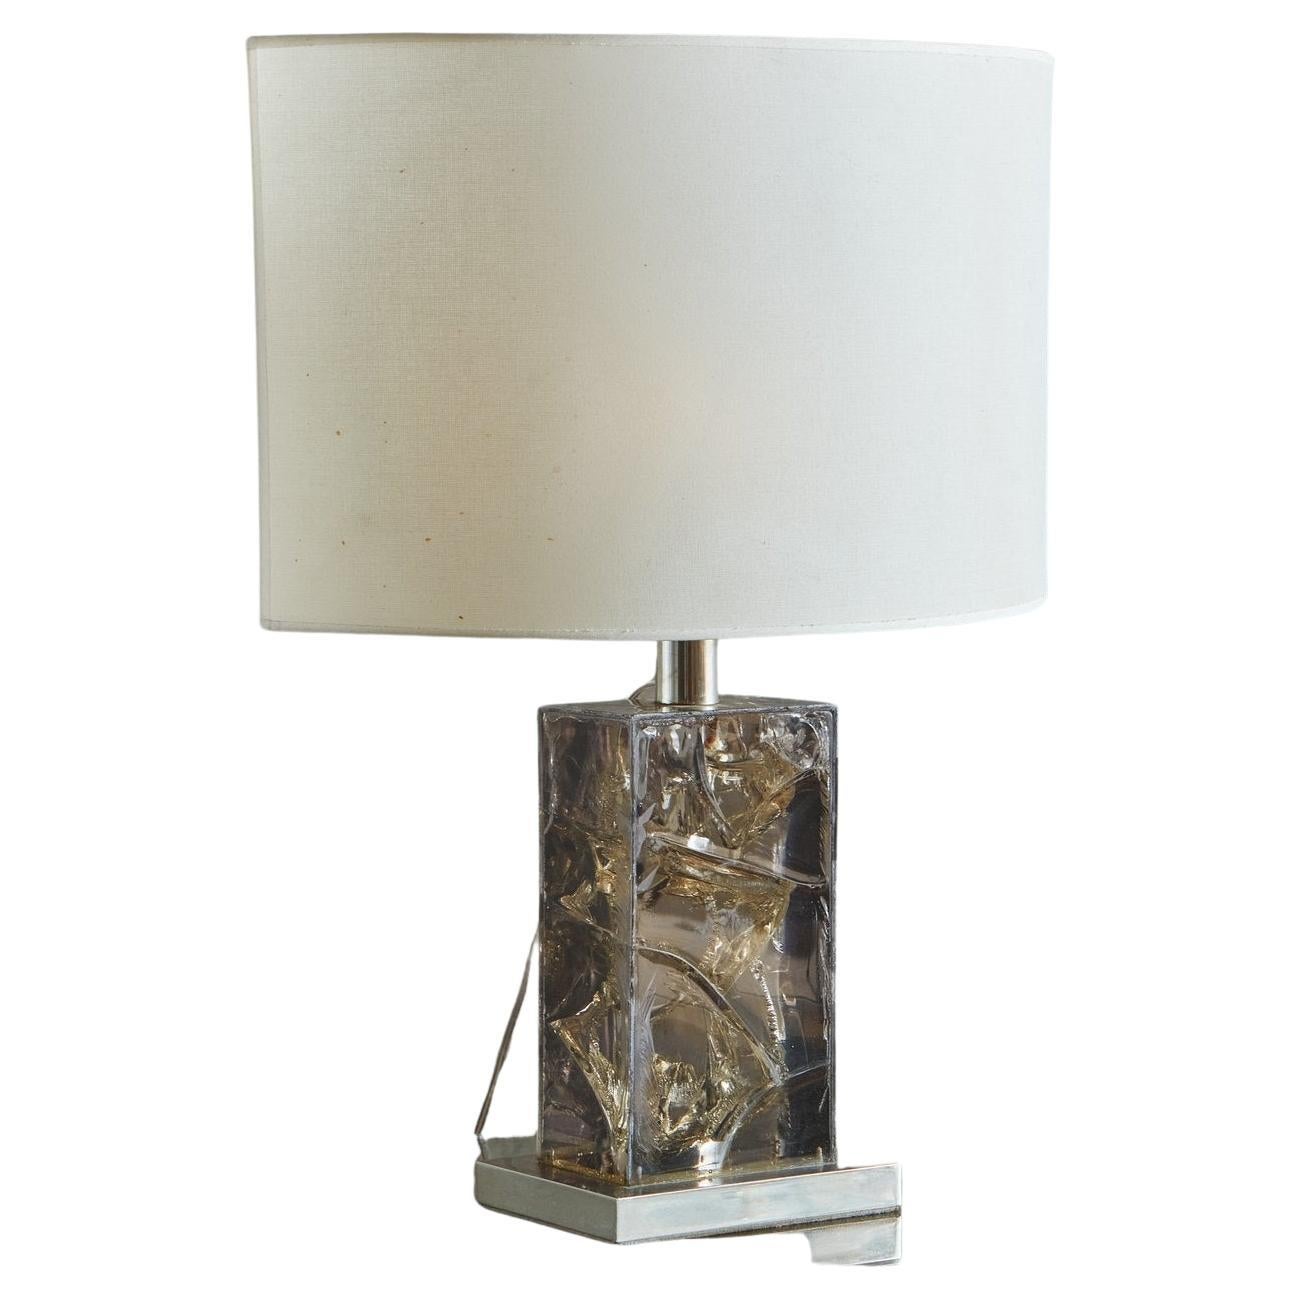 Smoked Fractured Resin + Chrome Table Lamp, France 20th Century For Sale